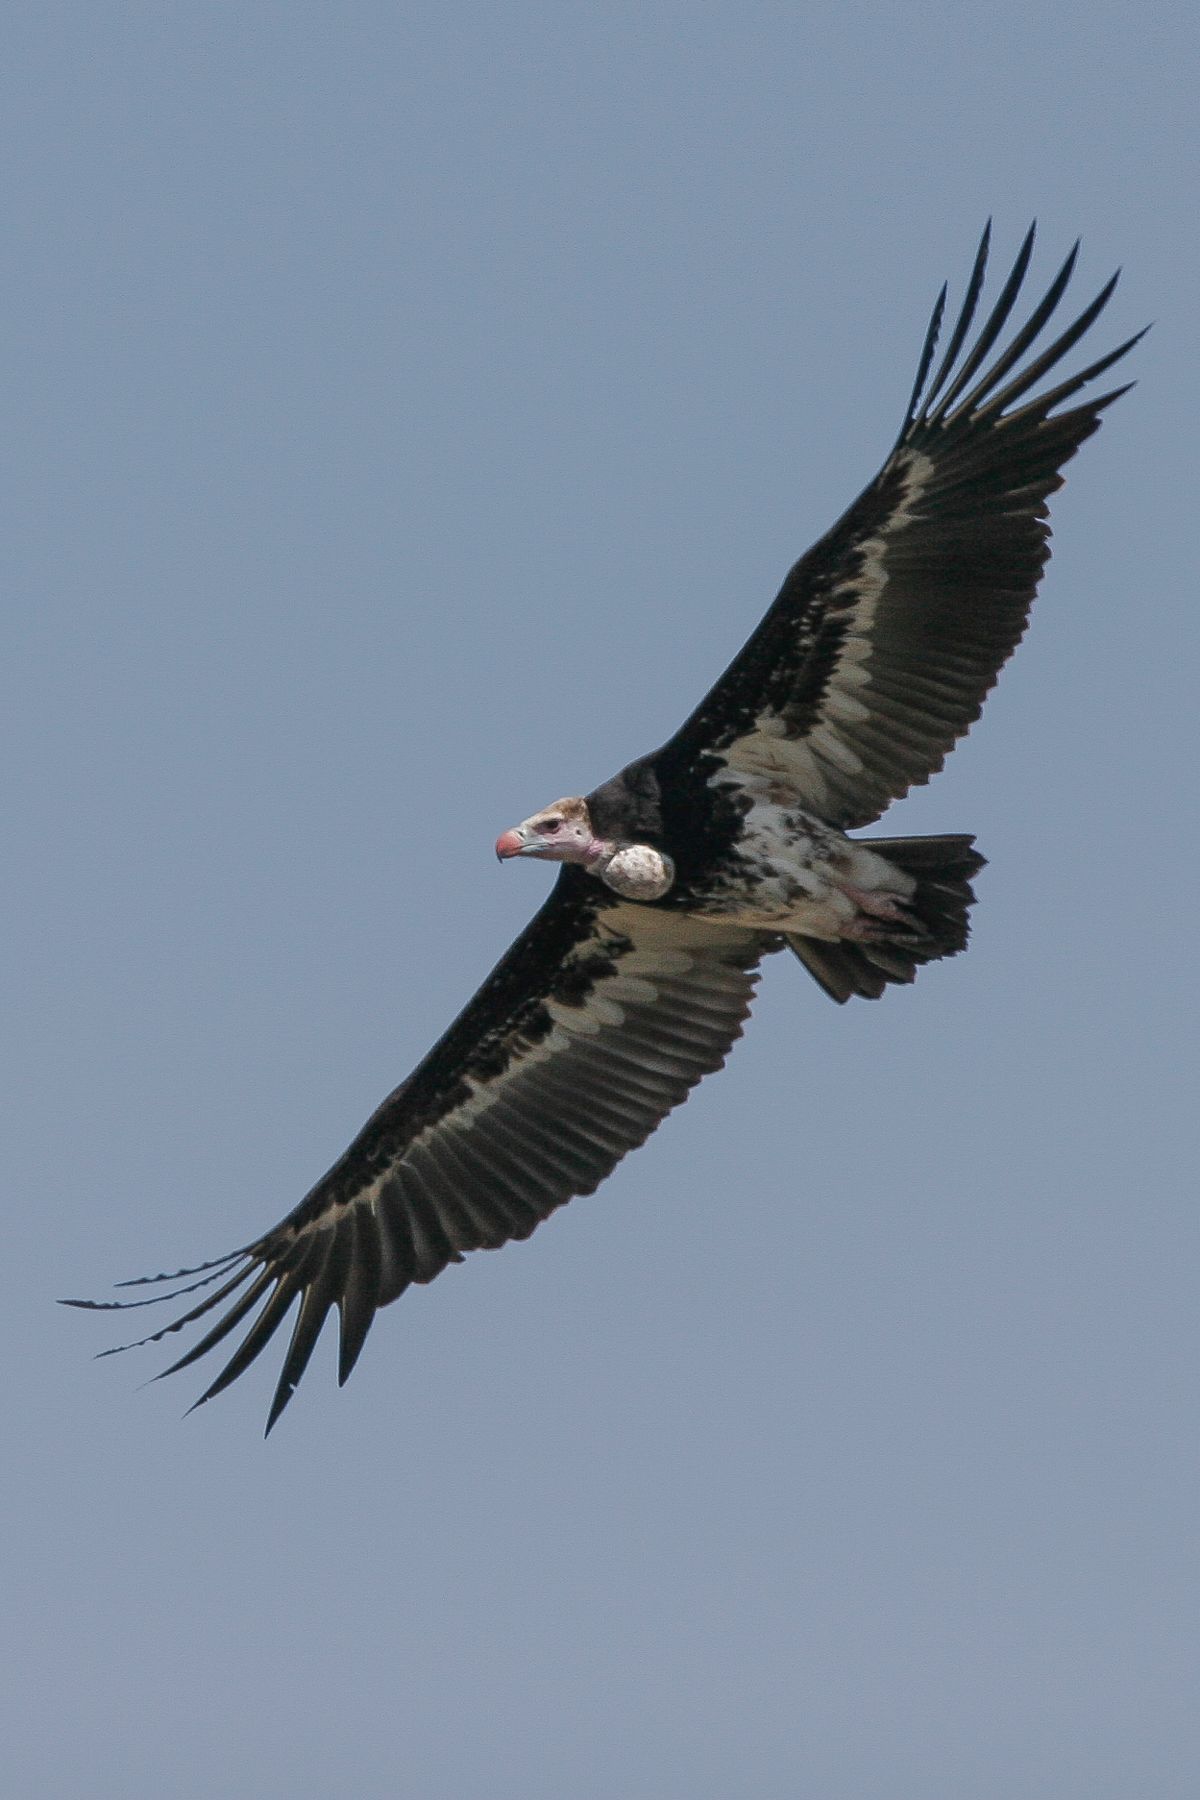 The multitude of kills attract vultures, like this strikingly-patterned White-headed Vulture